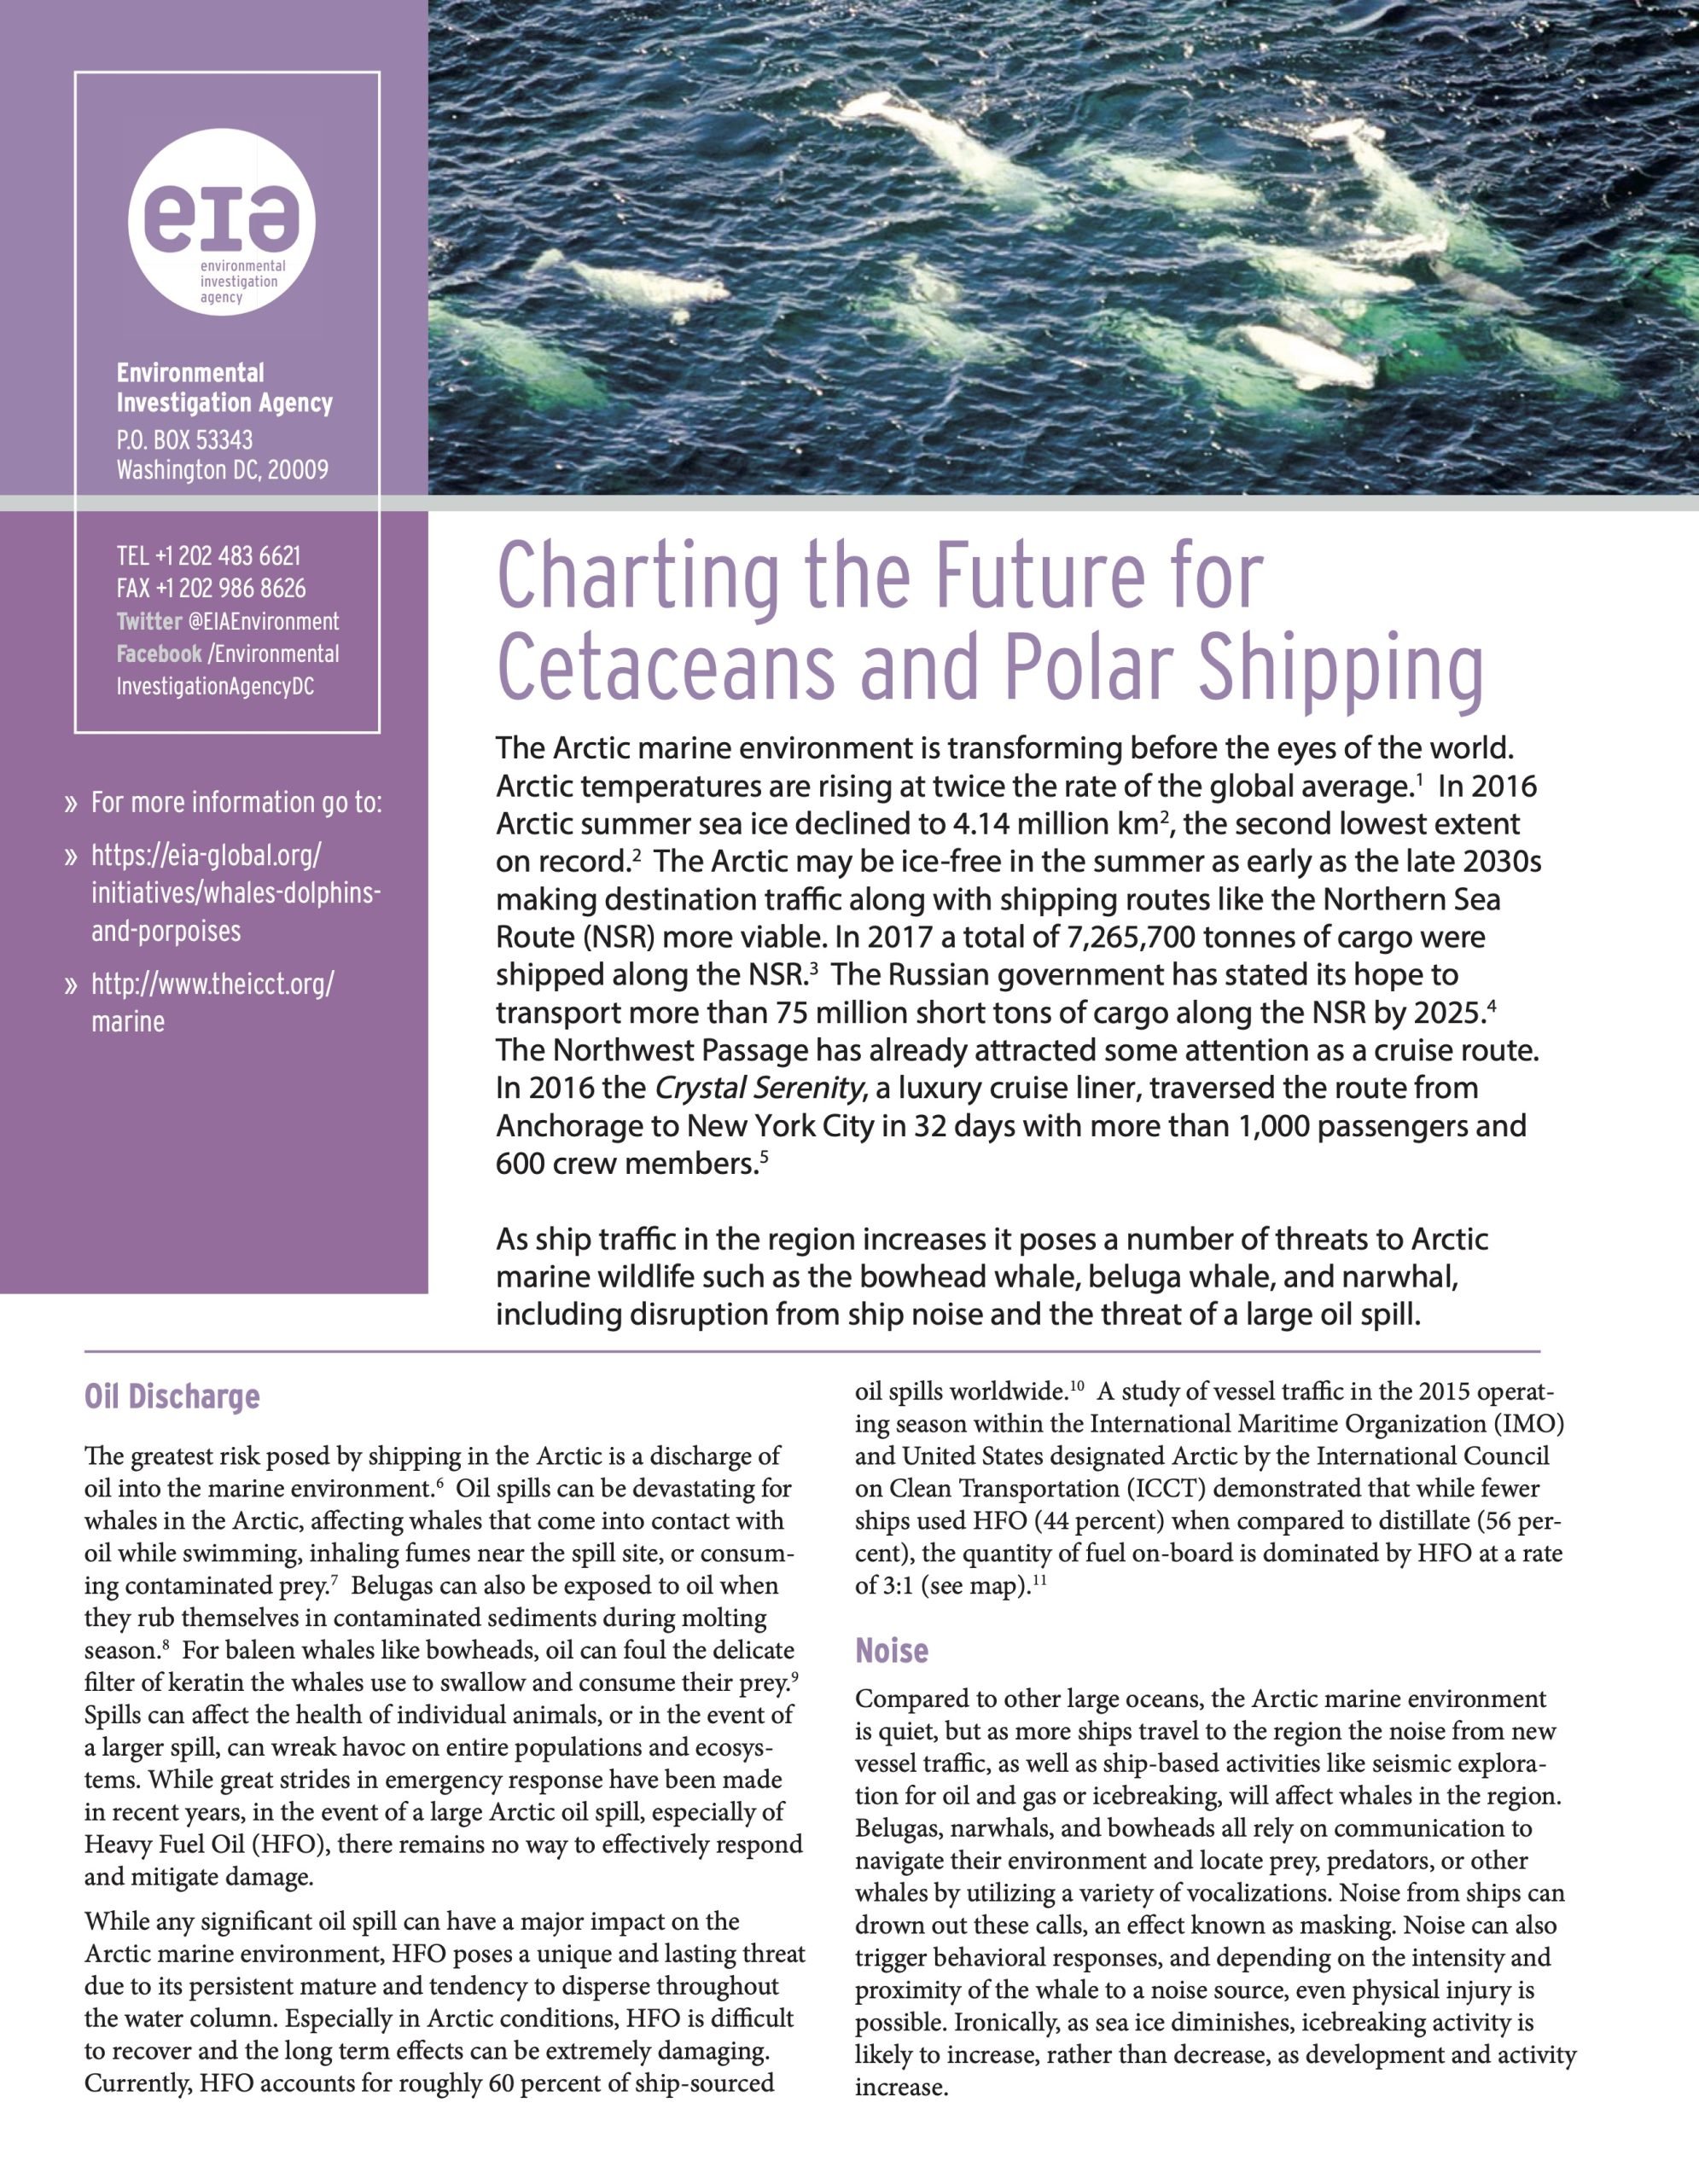 Charting the Future for Cetaceans and Polar Shipping